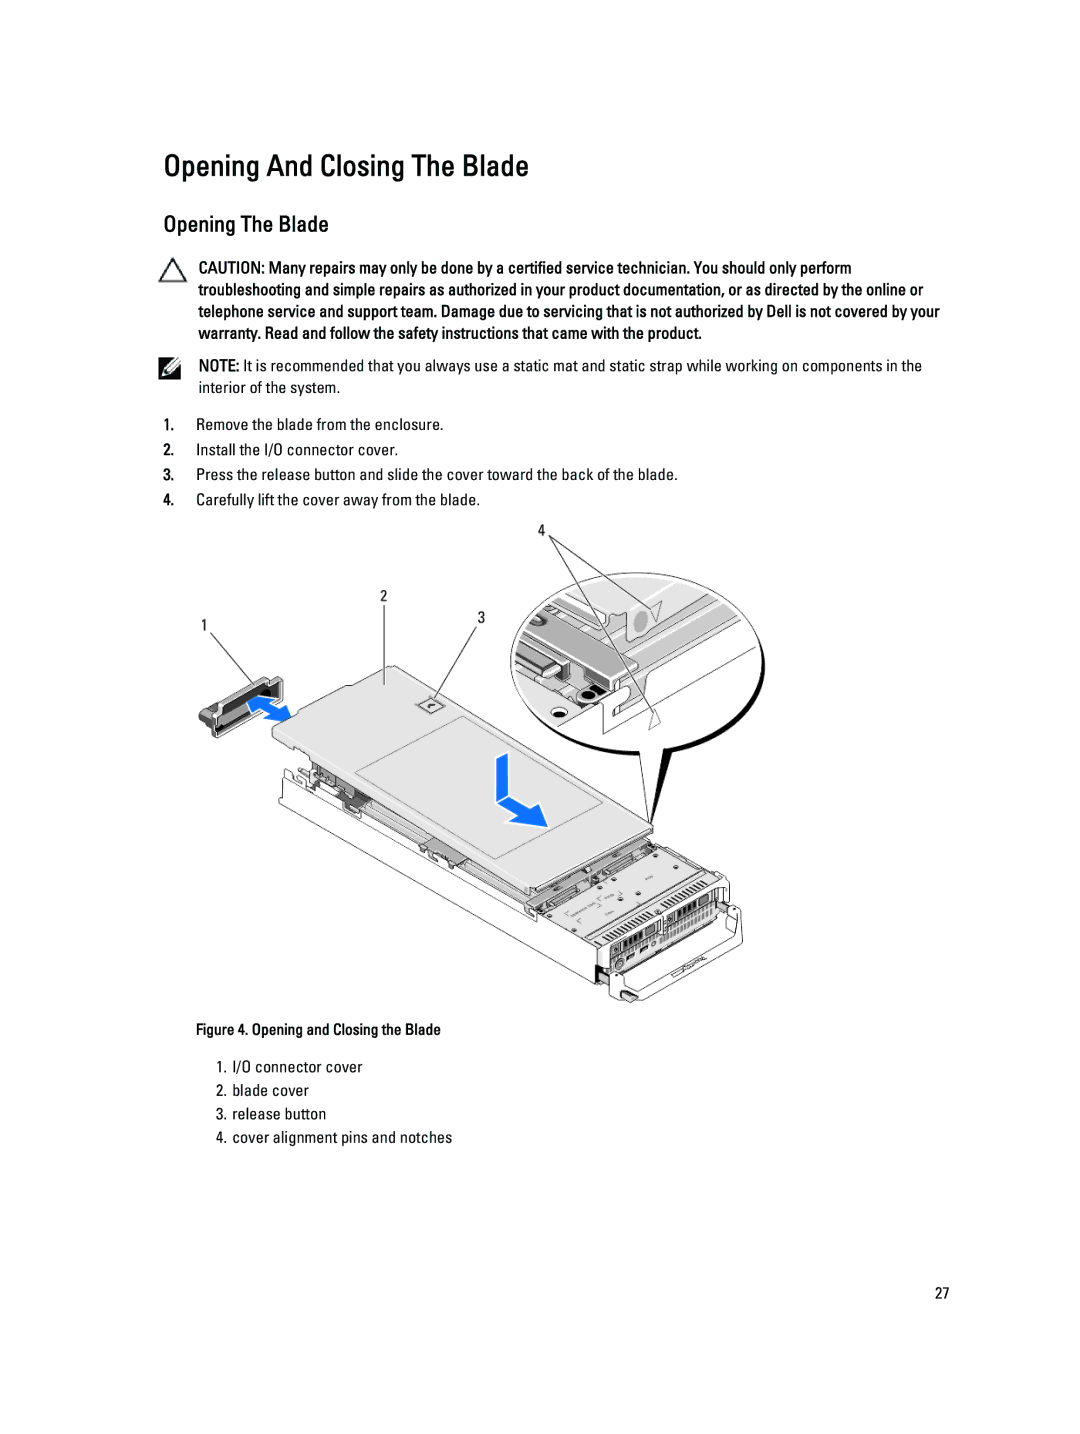 Dell M620 owner manual Opening And Closing The Blade, Opening The Blade 